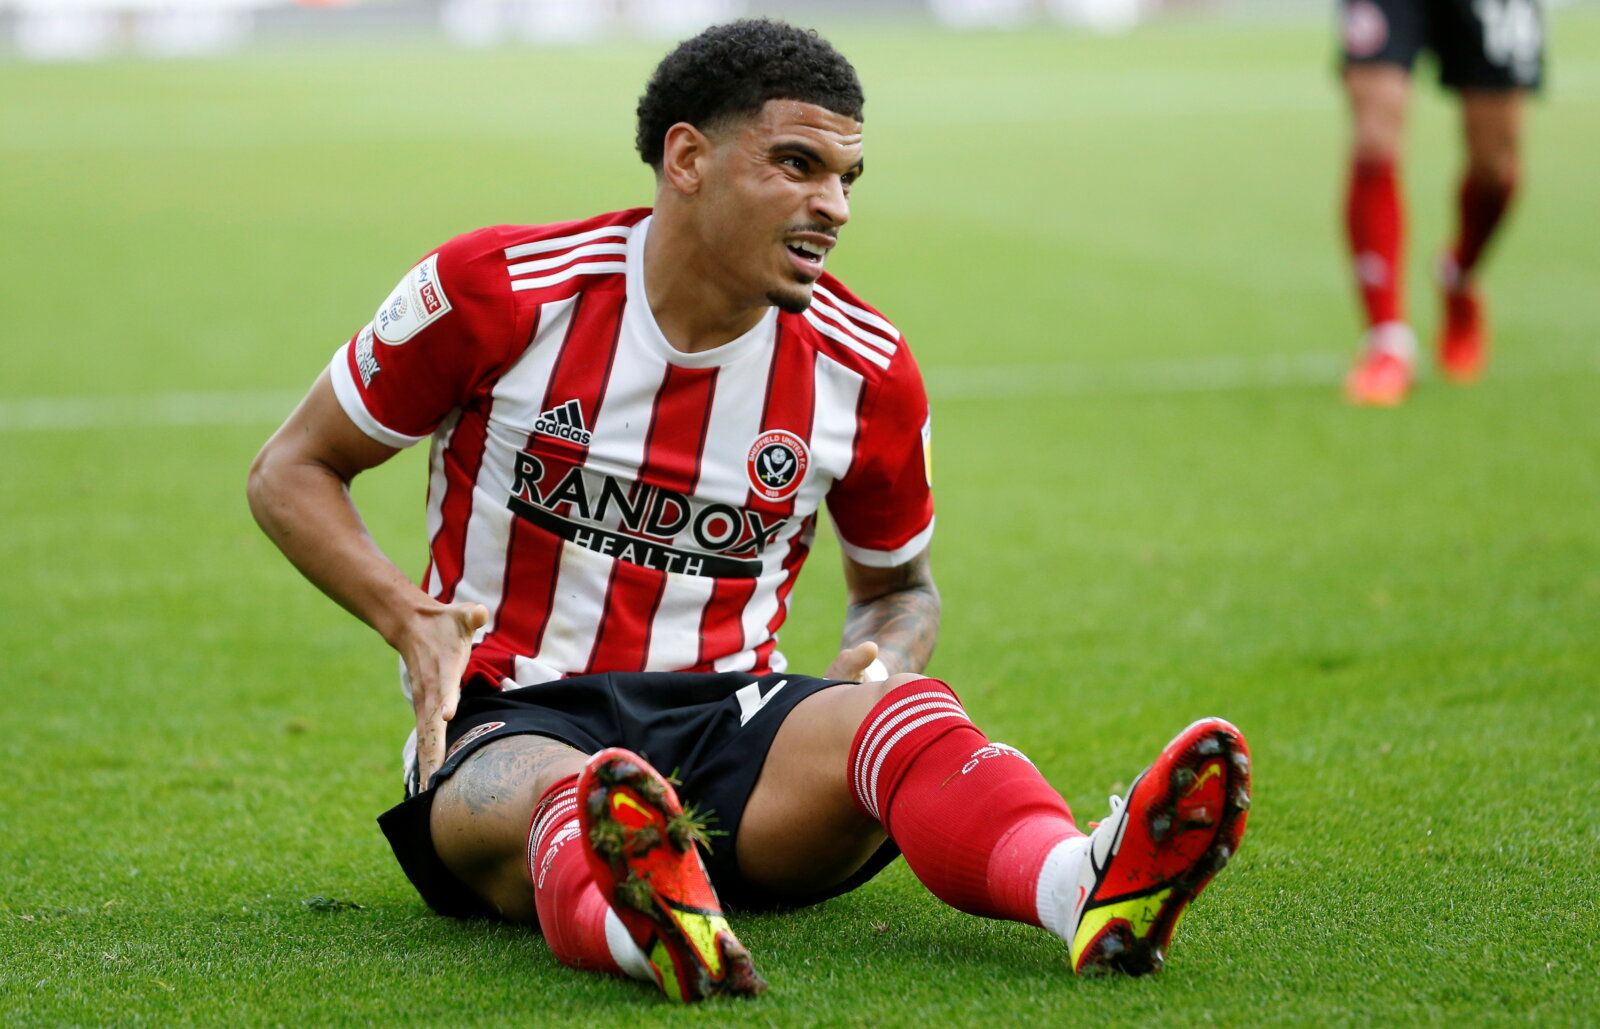 Soccer Football - Championship - Sheffield United v Stoke City - Bramall Lane, Sheffield, Britain - October 16, 2021  Sheffield United's Morgan Gibbs-White   Action Images/Craig Brough    EDITORIAL USE ONLY. No use with unauthorized audio, video, data, fixture lists, club/league logos or 